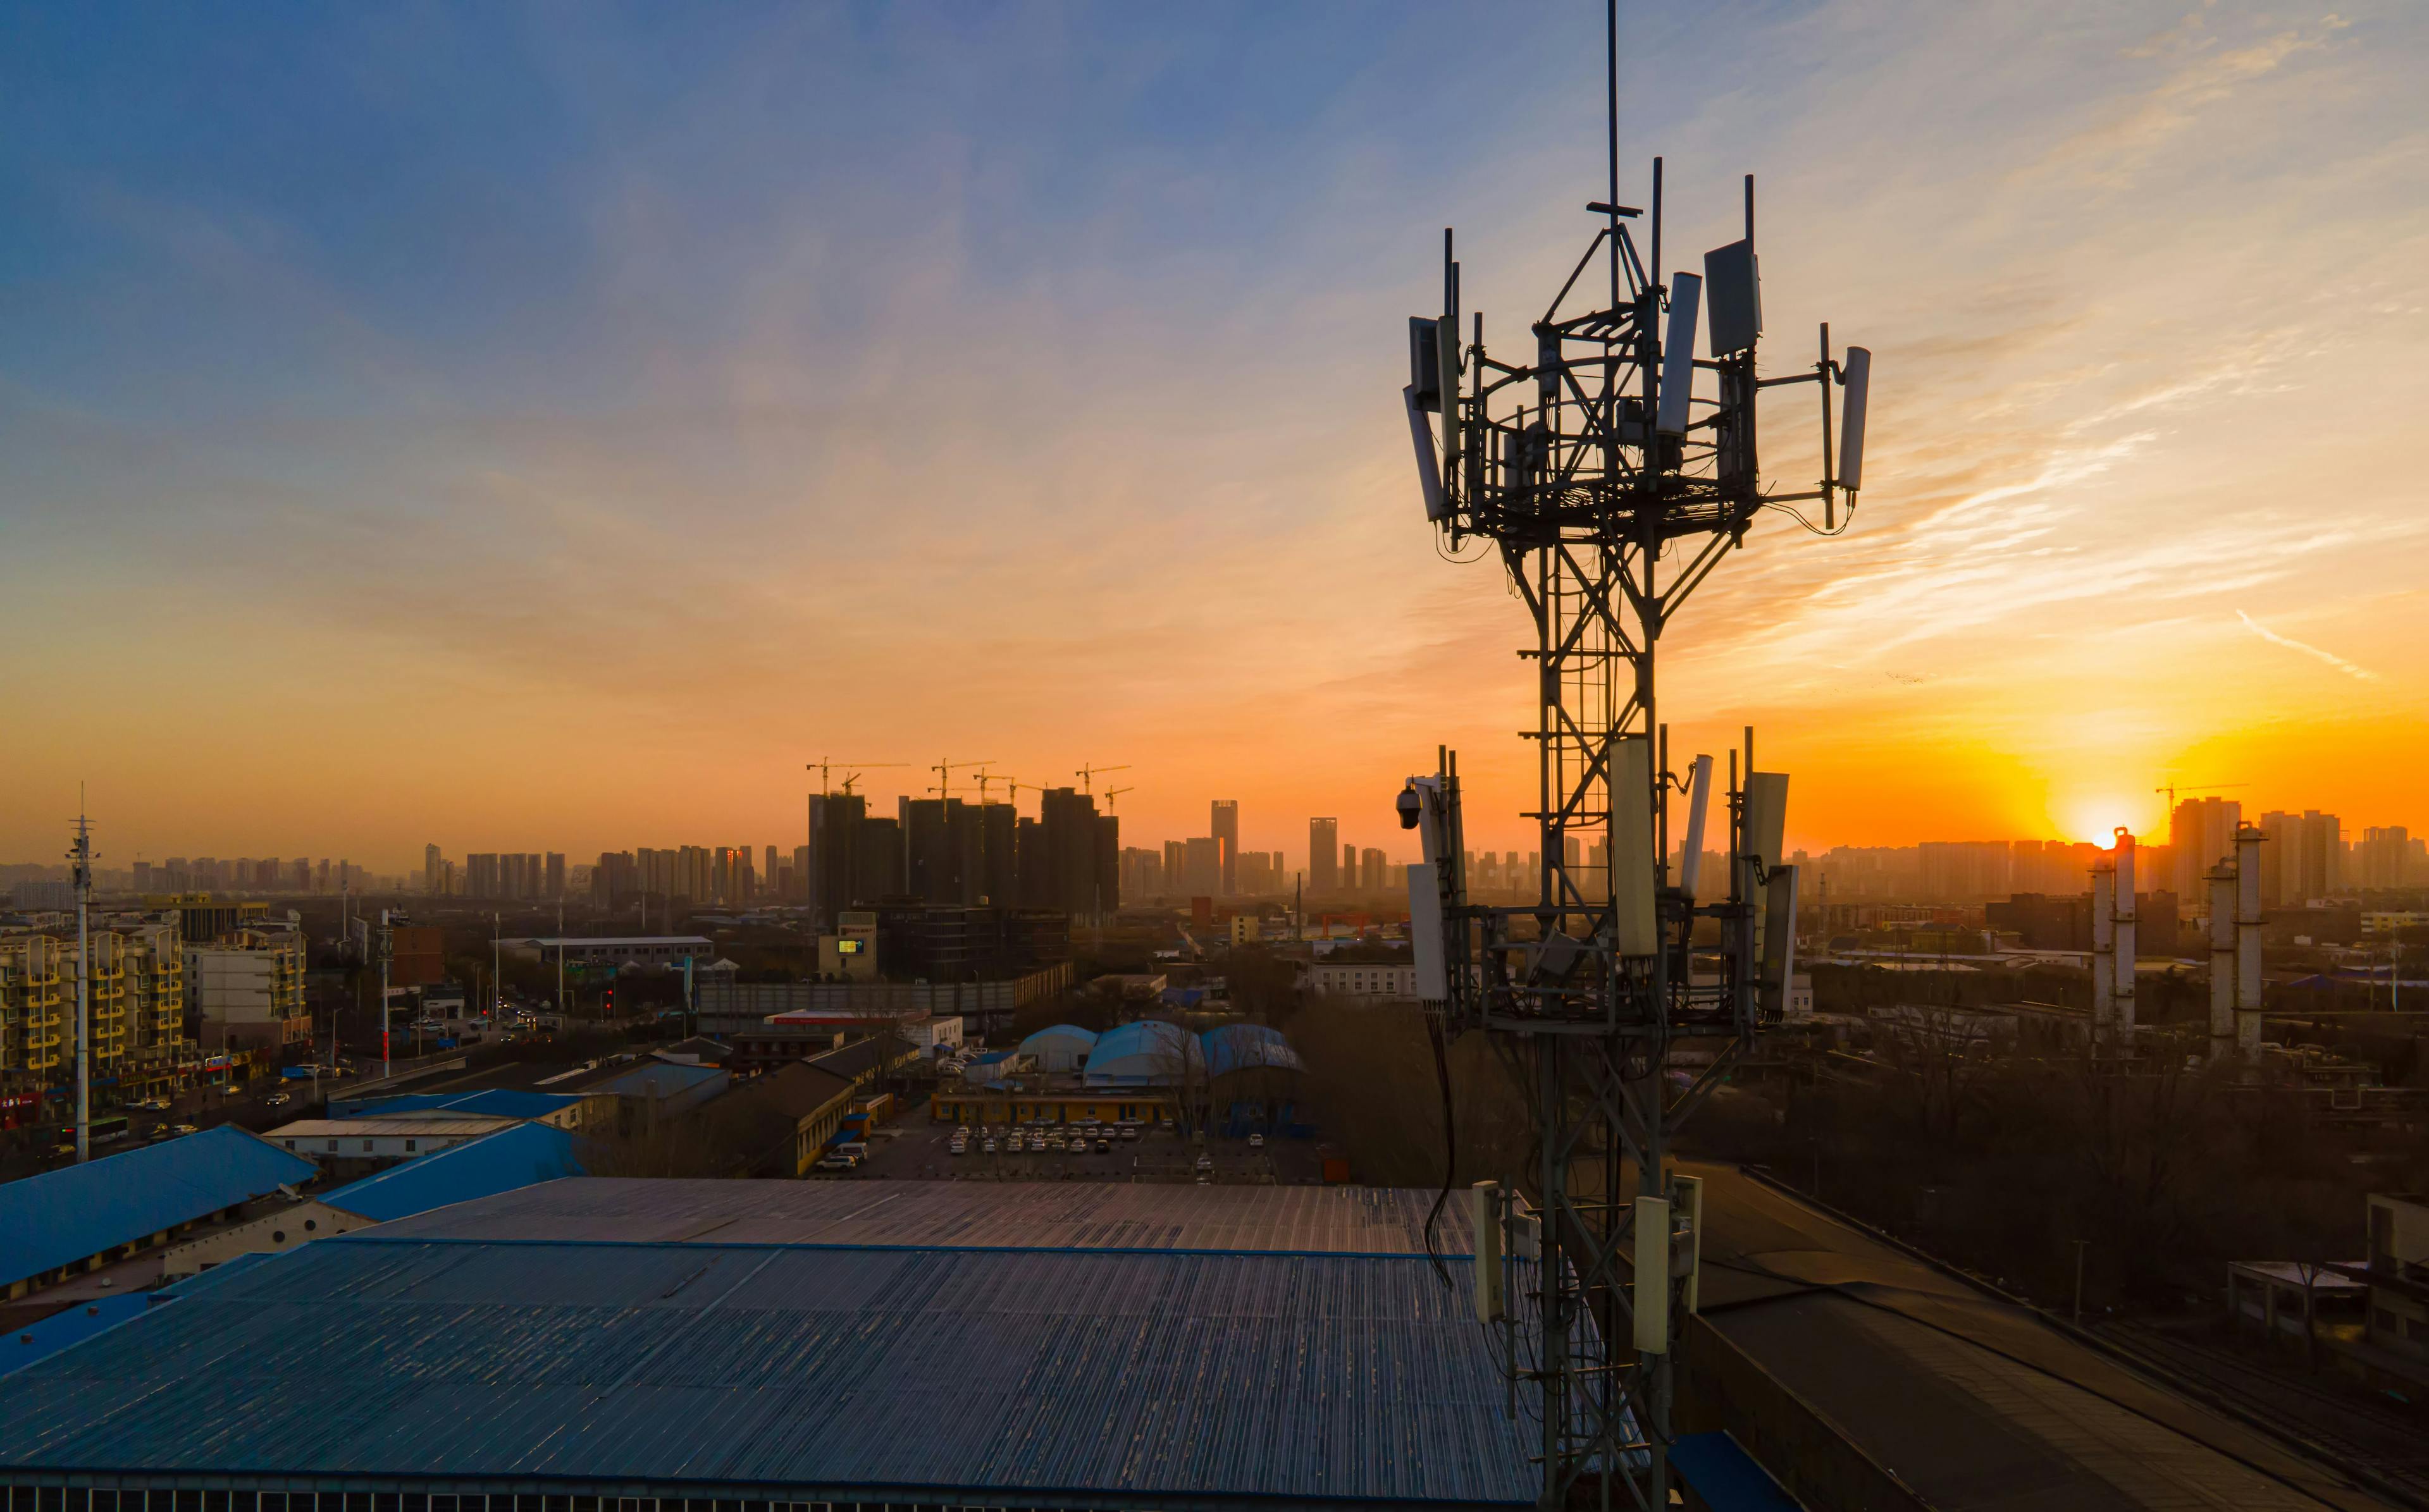 Image of a 5G tower with a city skyline and sunset in the background